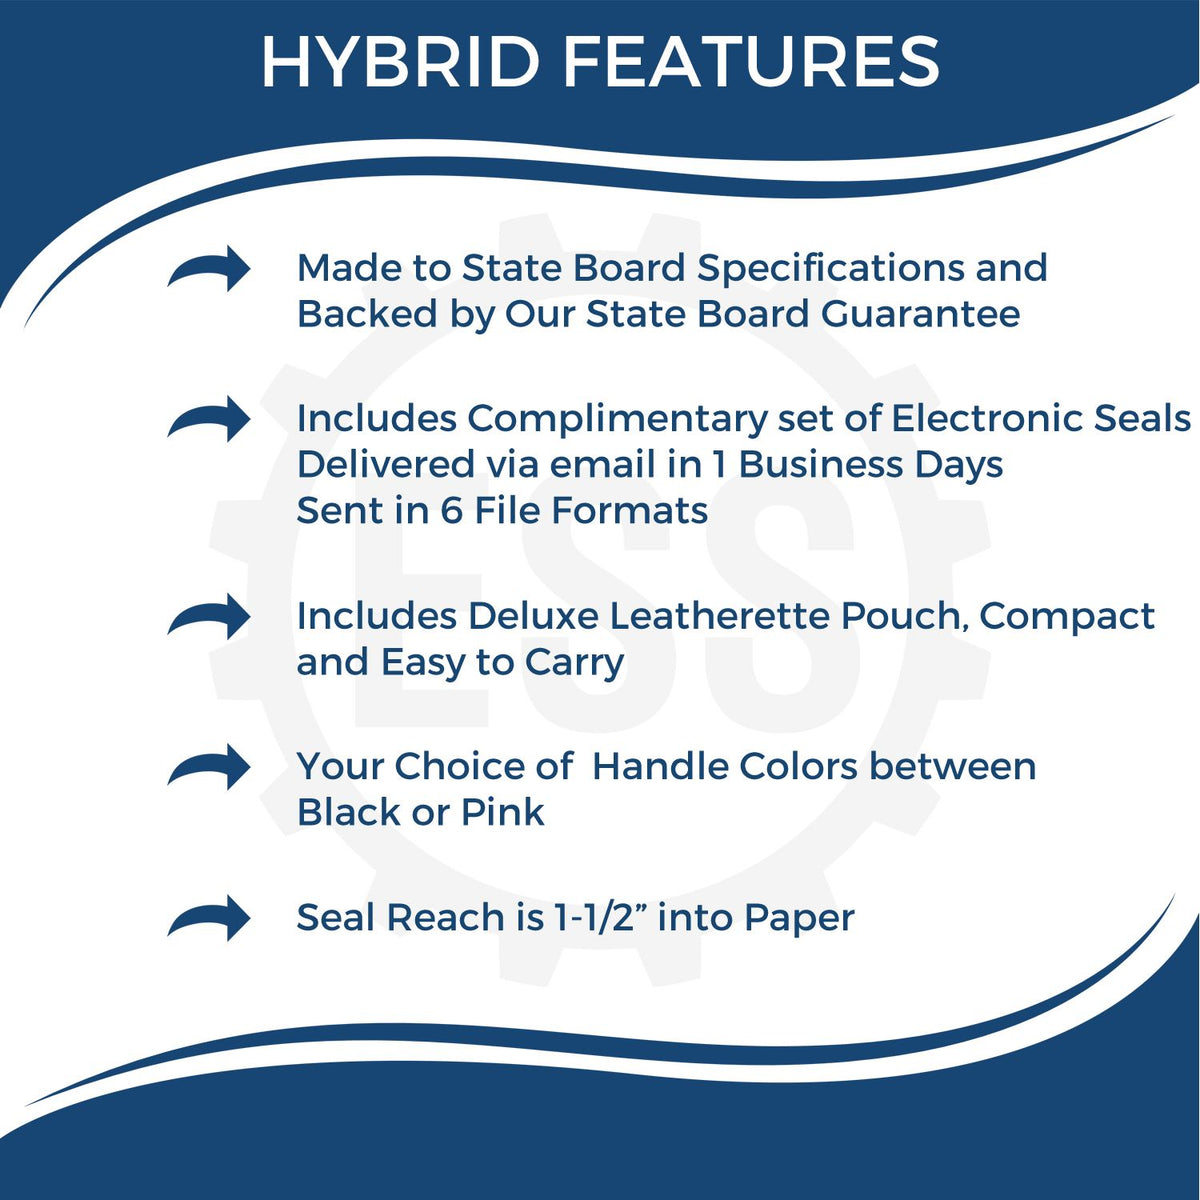 A picture of an infographic highlighting the selling points for the Hybrid Virginia Architect Seal